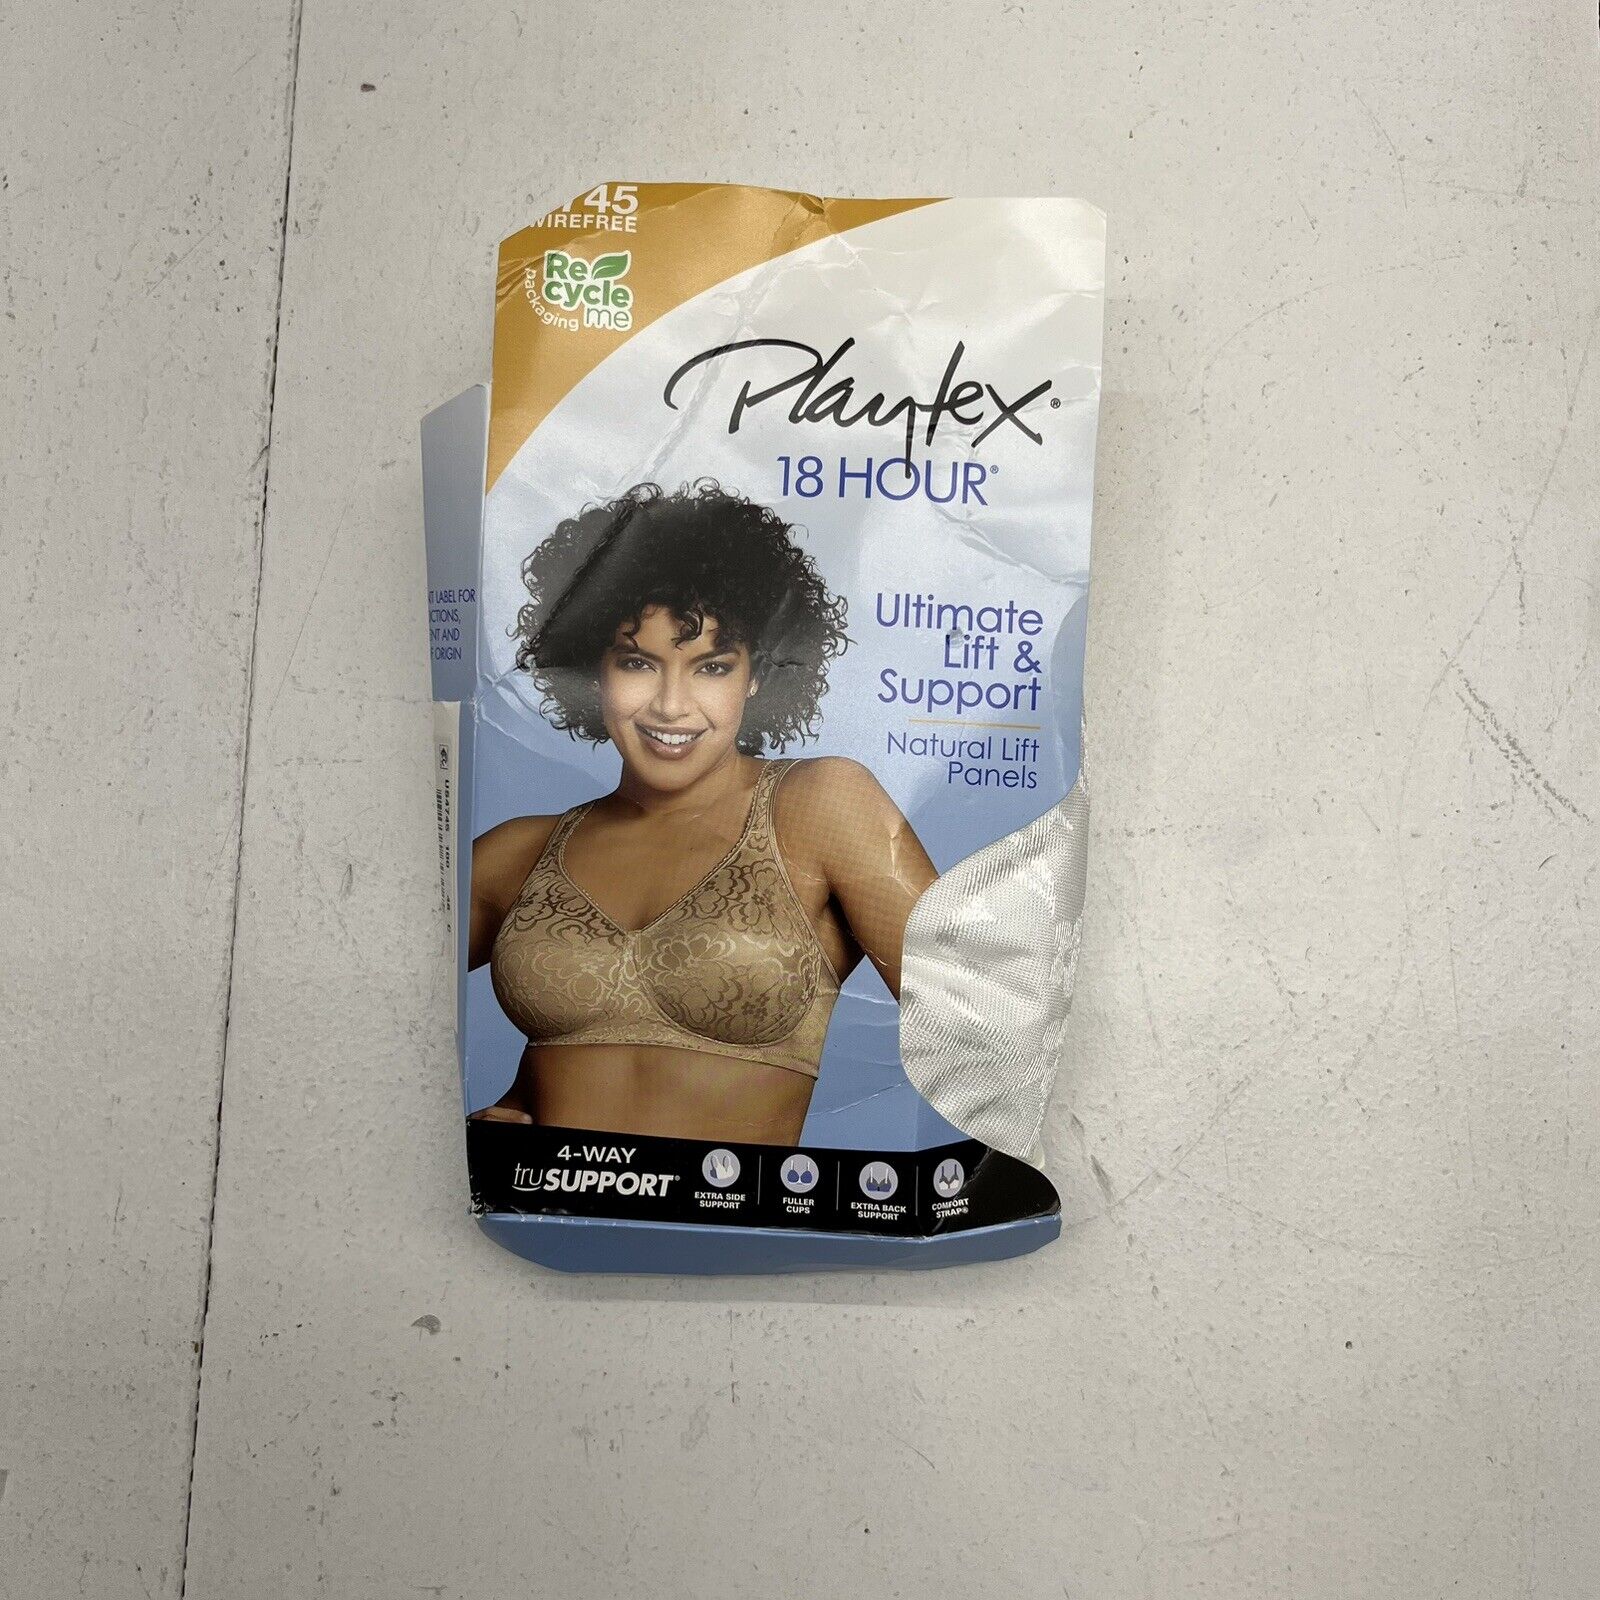 Playtex Ultimate Shoulder Comfort wirefree white bra size 36D